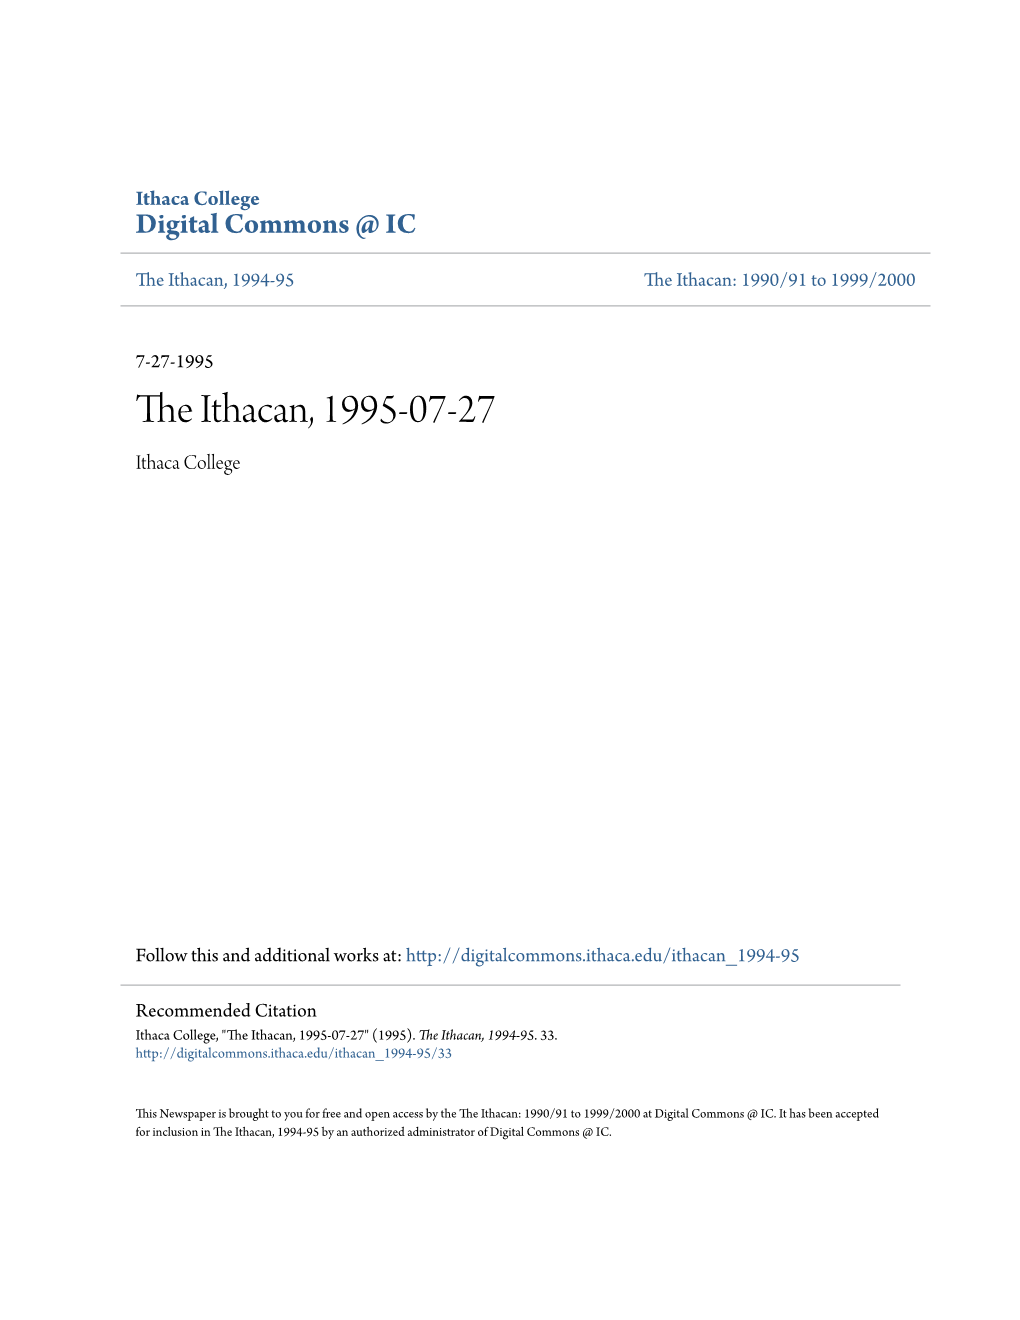 The Ithacan, 1995-07-27